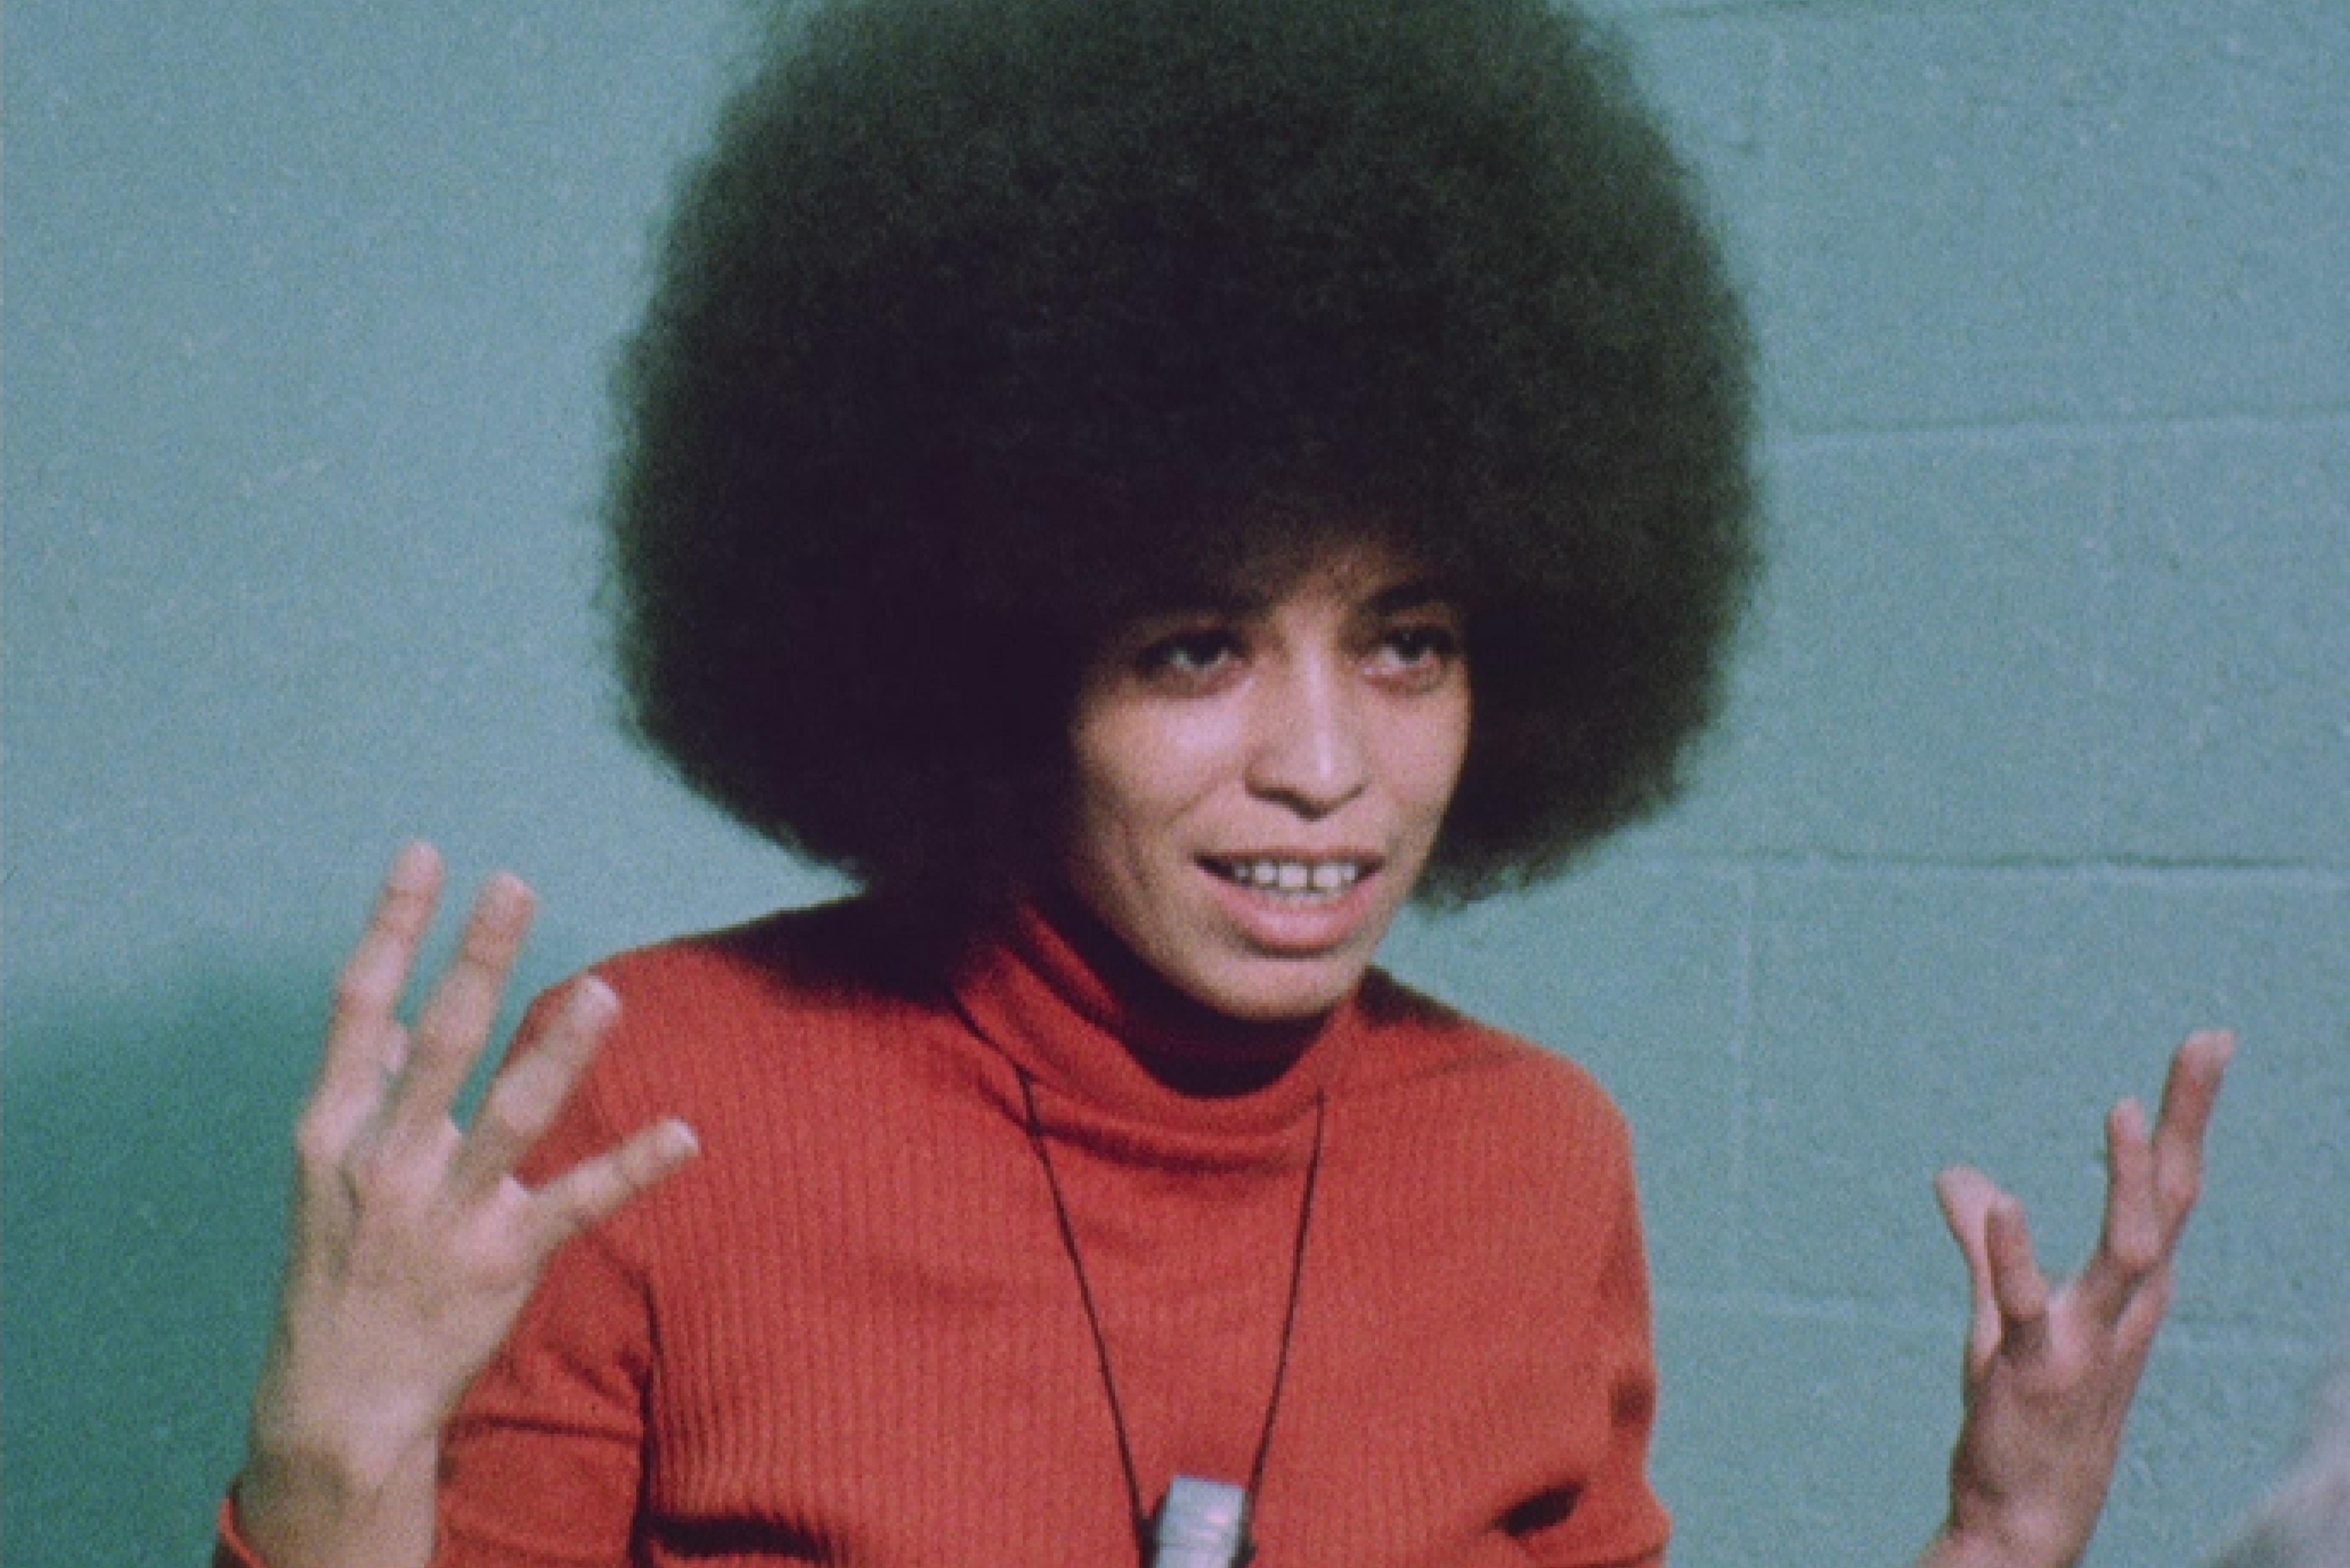 Portrait of Angela Davis. She is wearing an orange Turtleneck long sleeve and a microphone around her neck while gesturing with both hands.